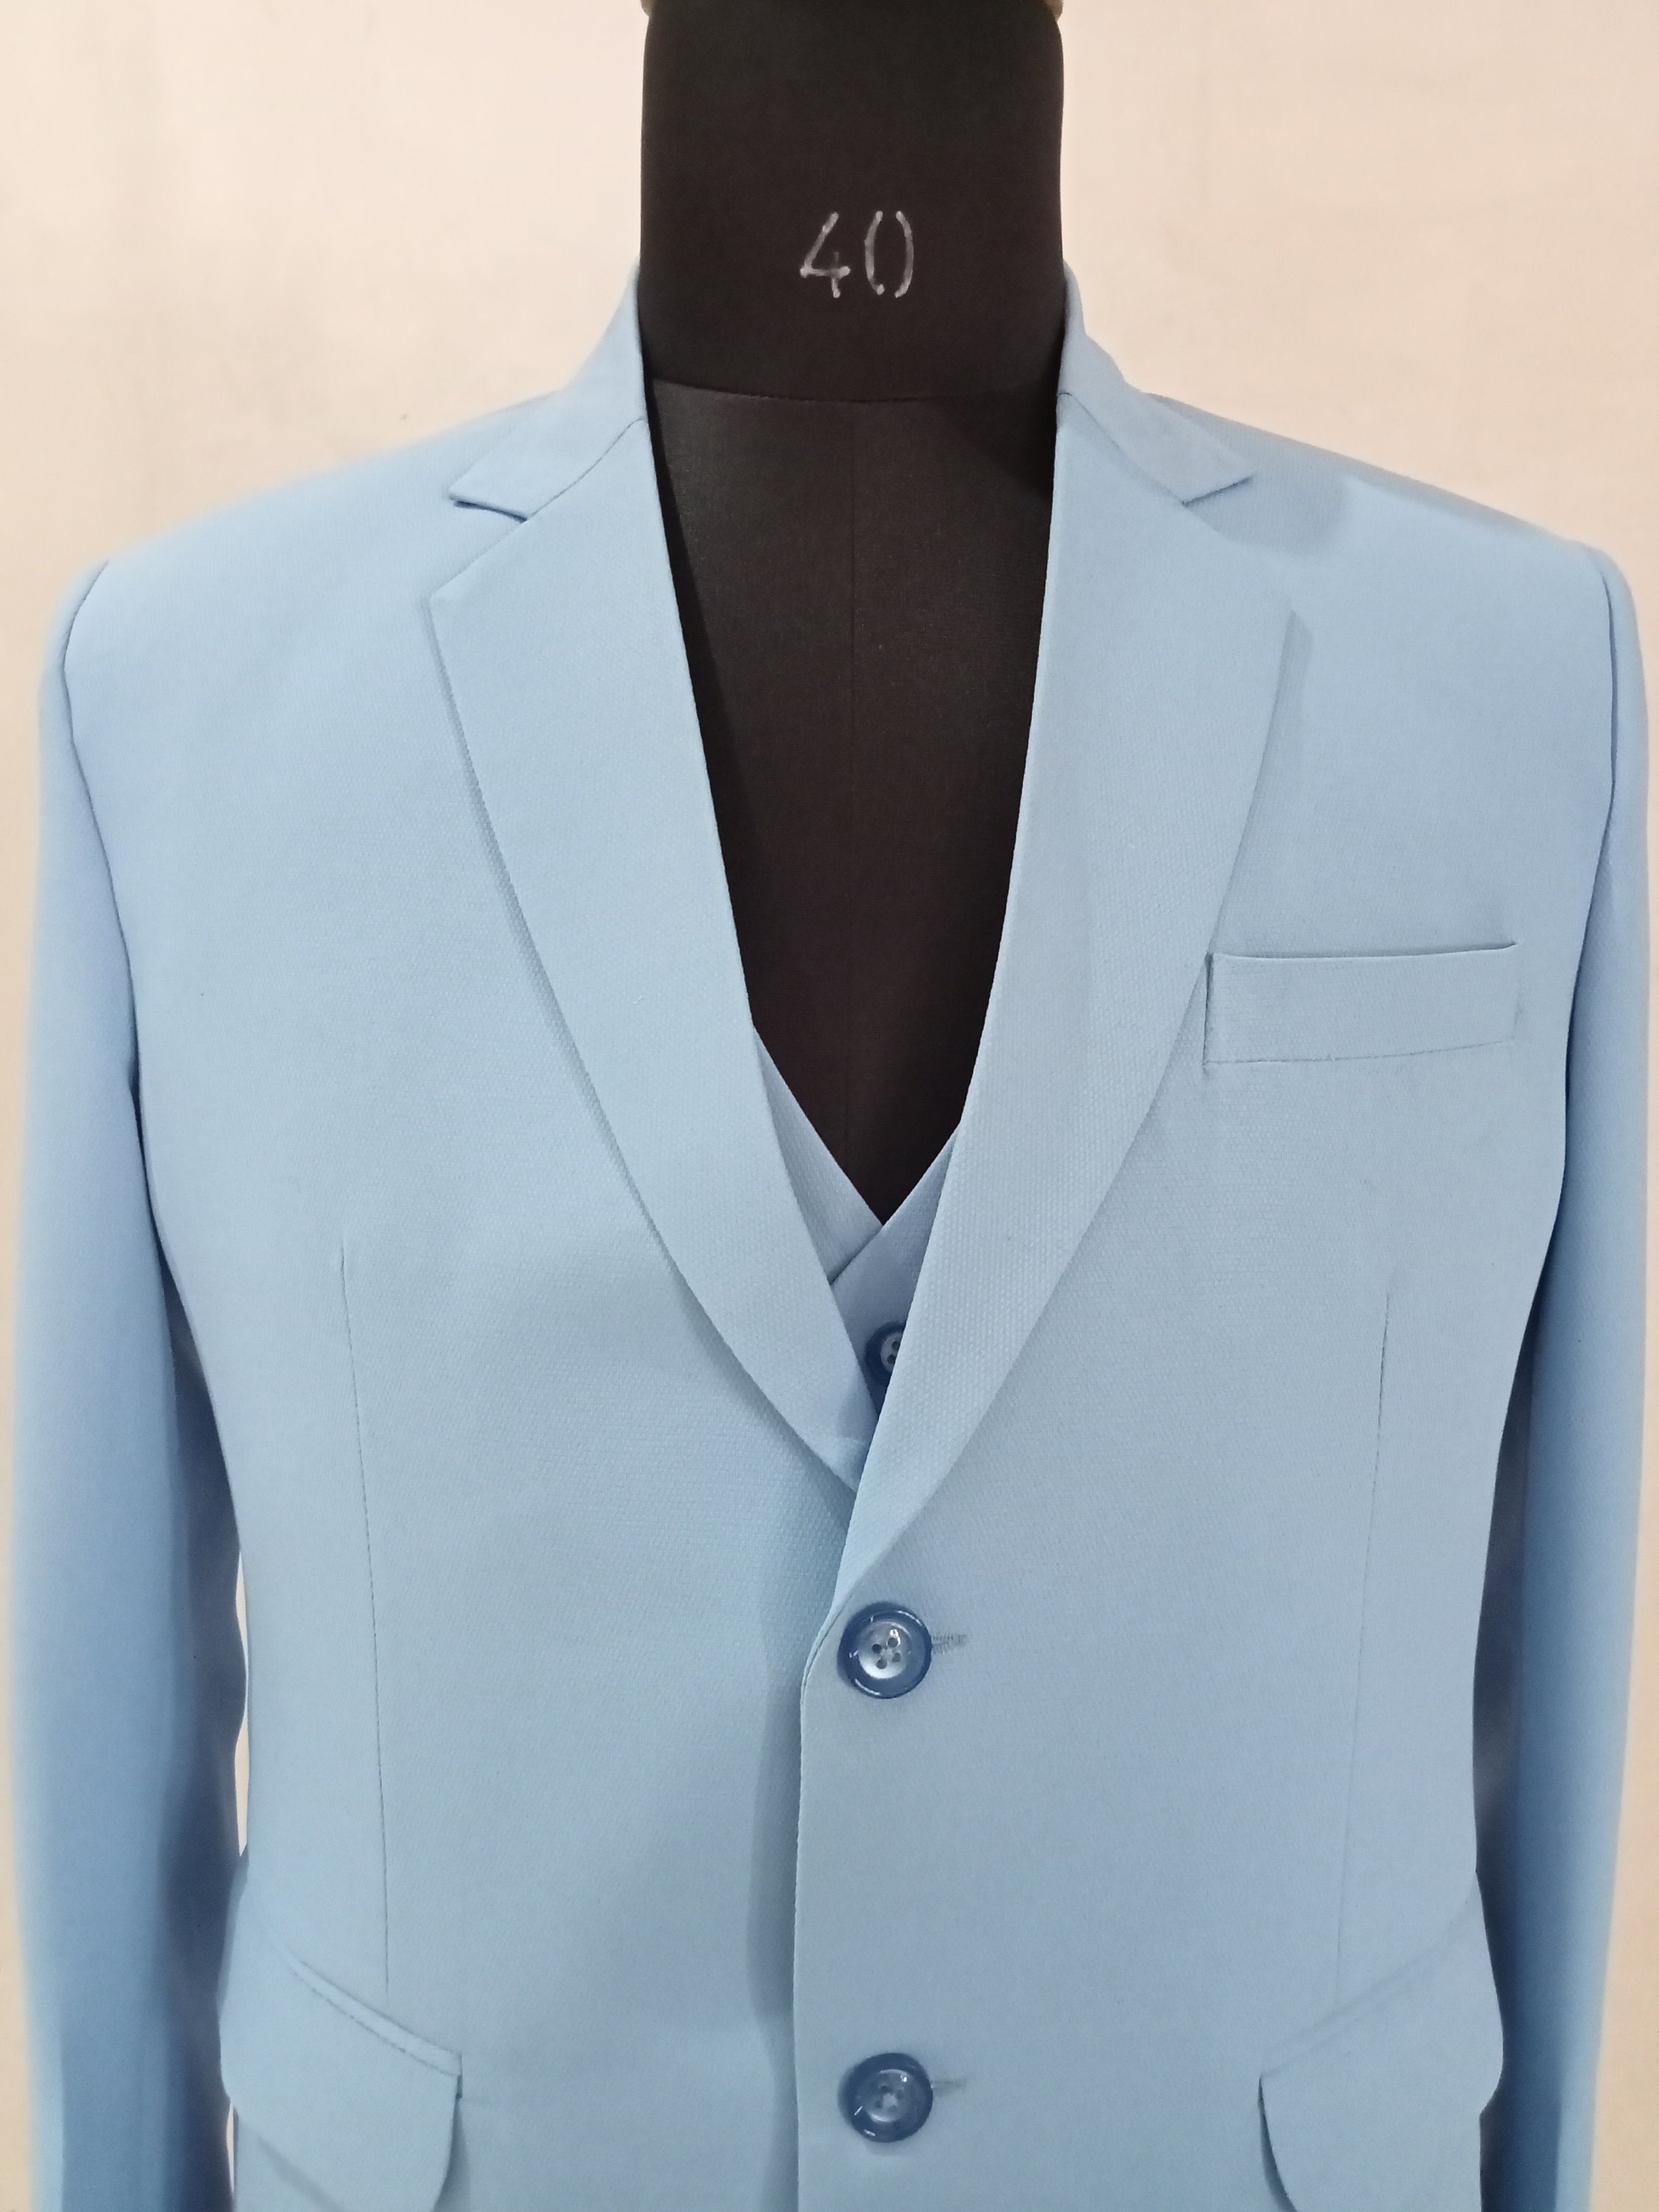 Buy Sky Blue Suit Online In India - Etsy India